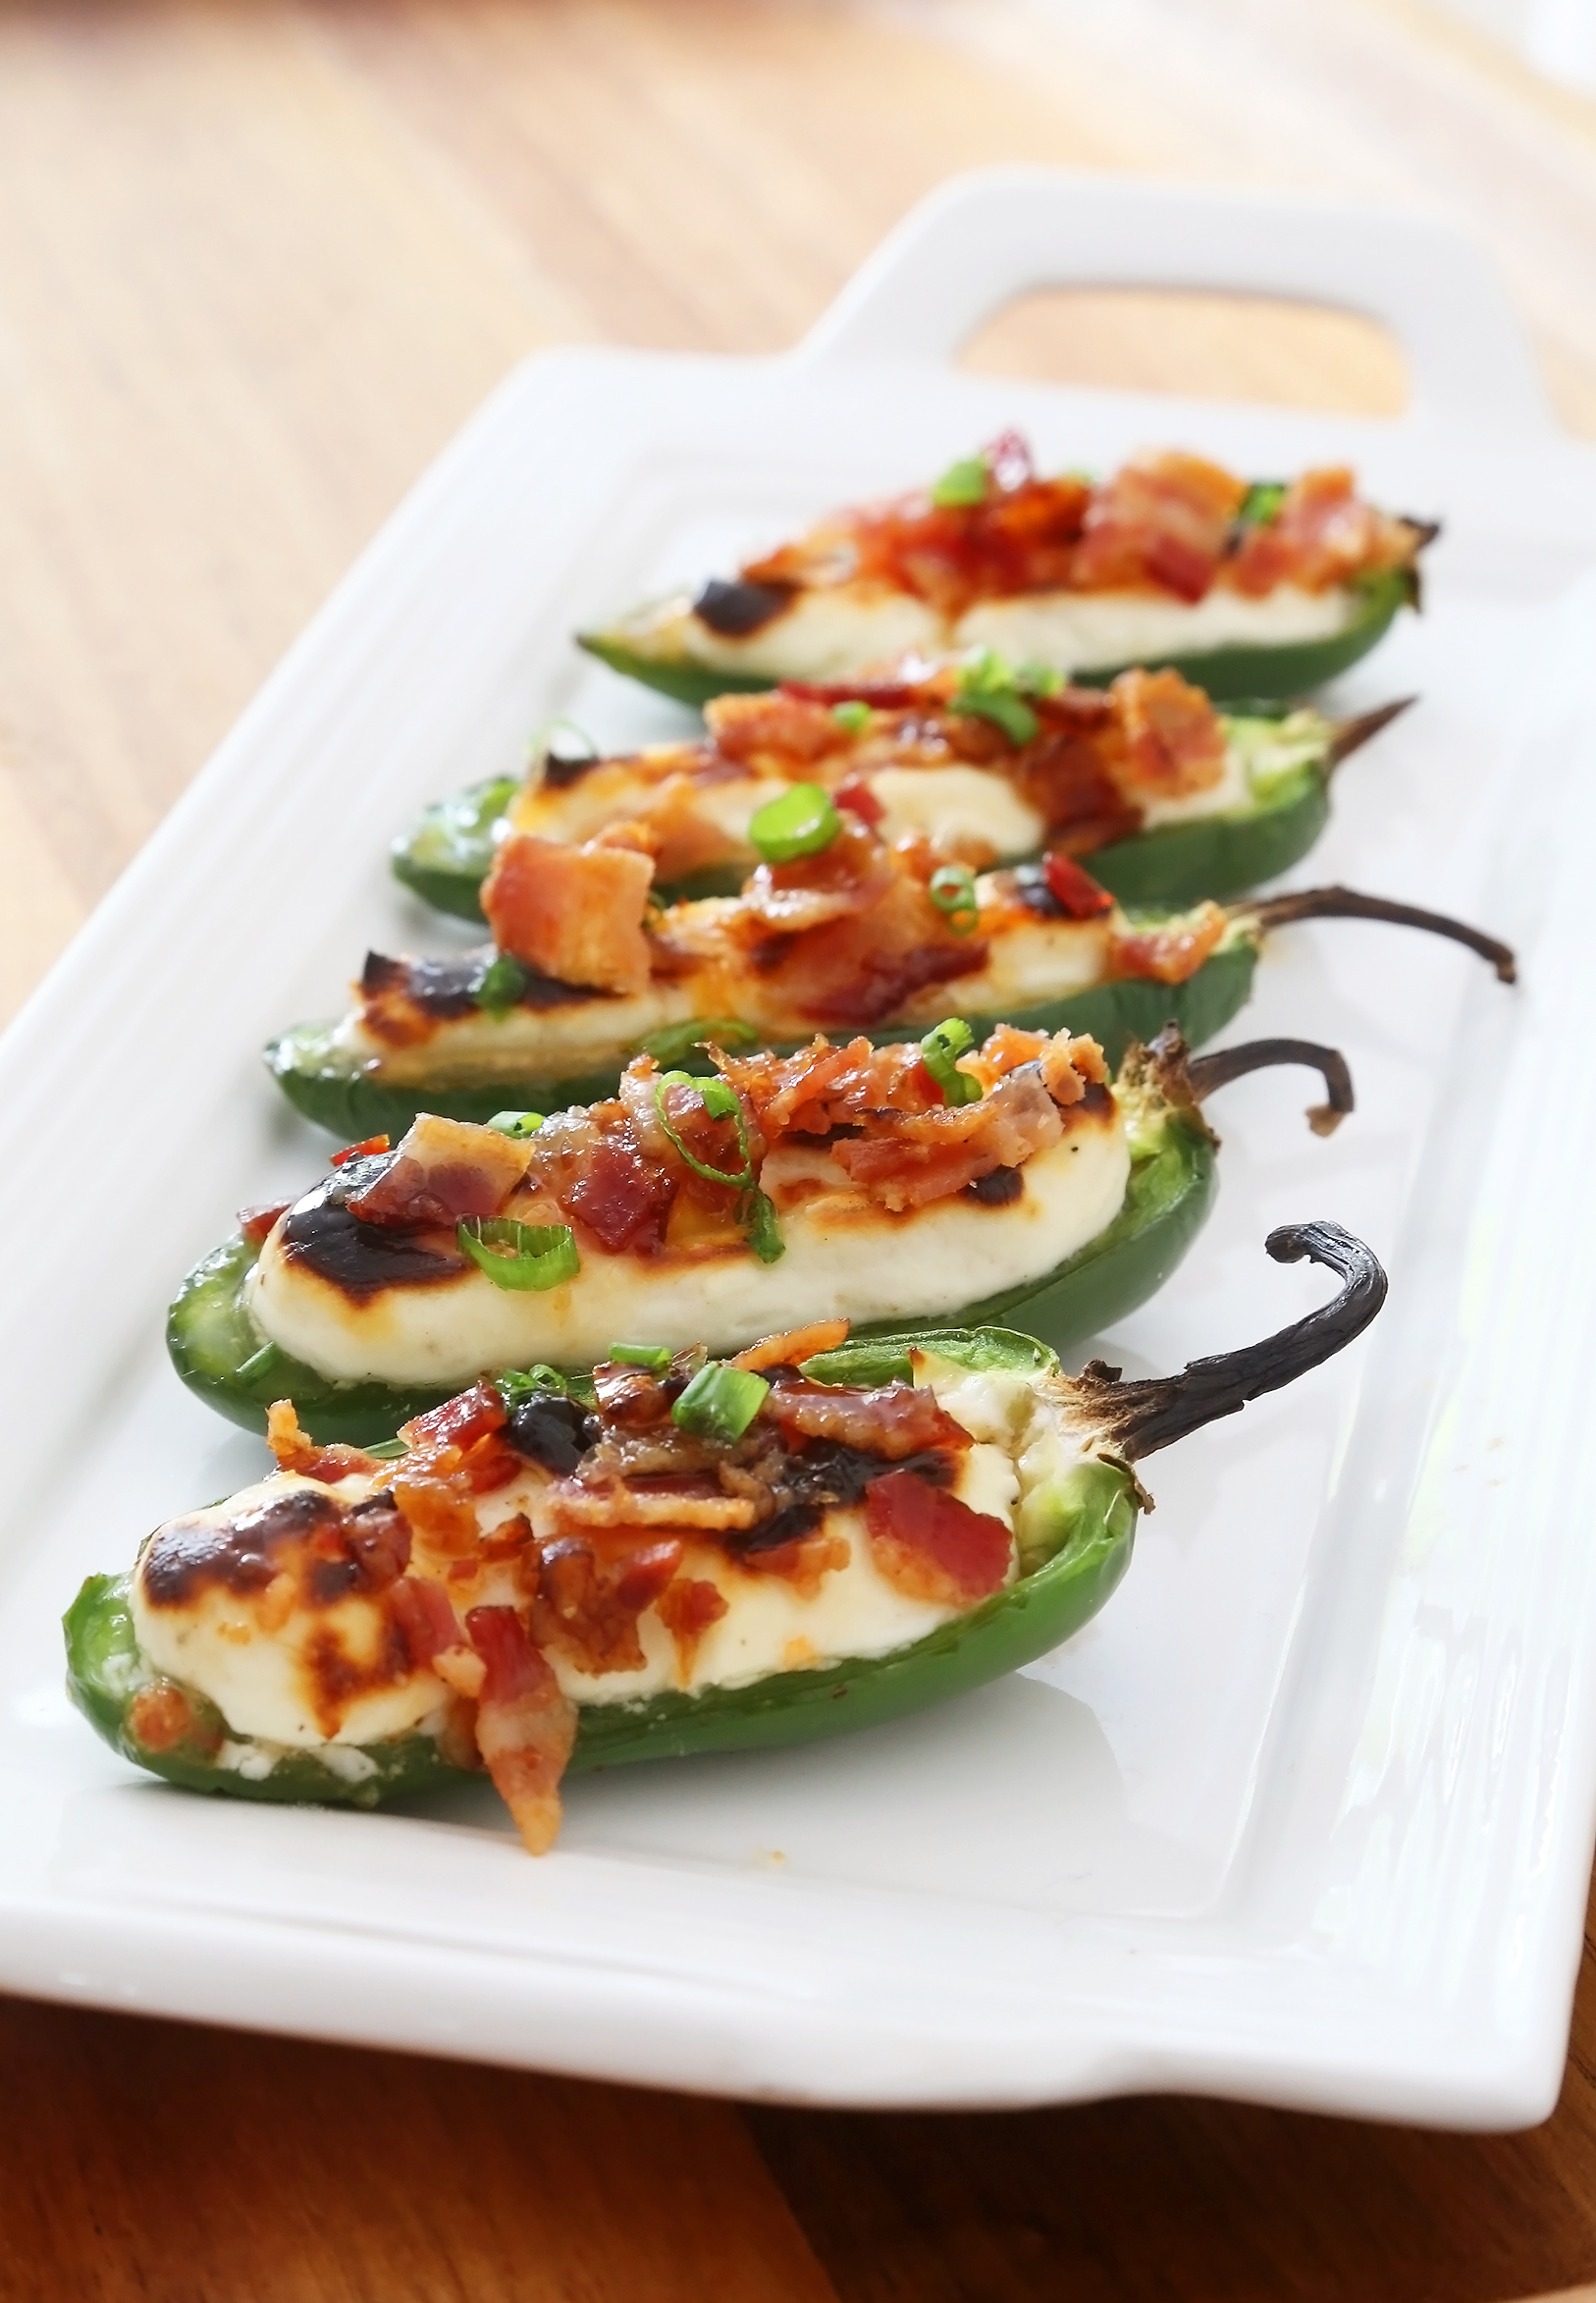 Bacon-Goat Cheese Jalapeño Poppers - Salty-crisp bacon, creamy goat cheese, savory-sweet jelly, all tucked into a roasted jalapeño! Thecomfortofcooking.com